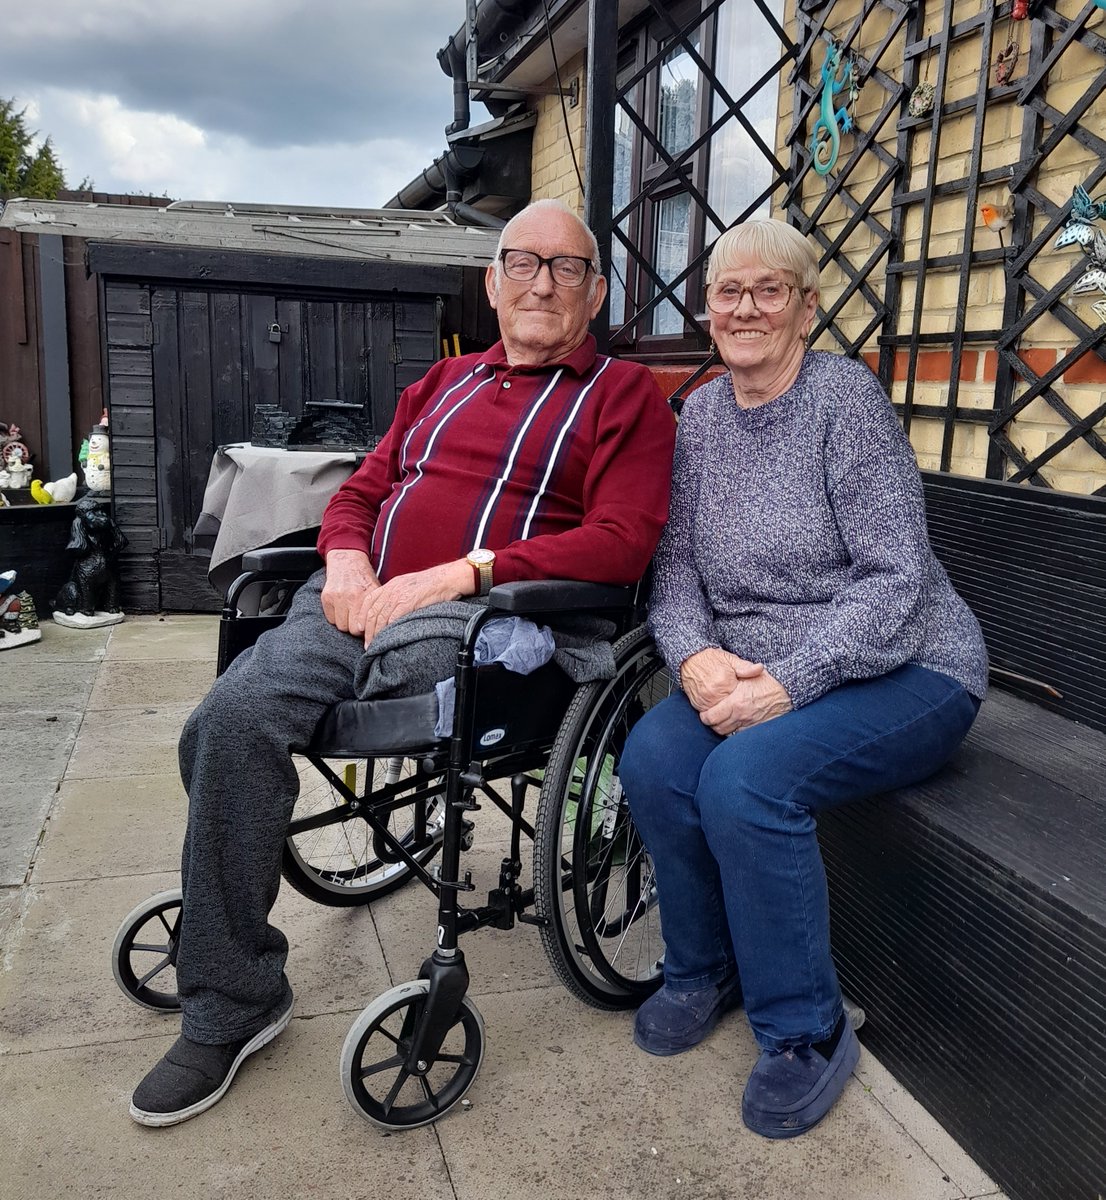 Our rehabilitation physiotherapists have been helping Fred get back to his garden, following an amputation. They are helping others  to achieve their goals faster too, thanks to an improvement project. Read more:  bit.ly/3RYQFbU
#QI #QITwitter @NHSKentCHFT @FabNHSStuff